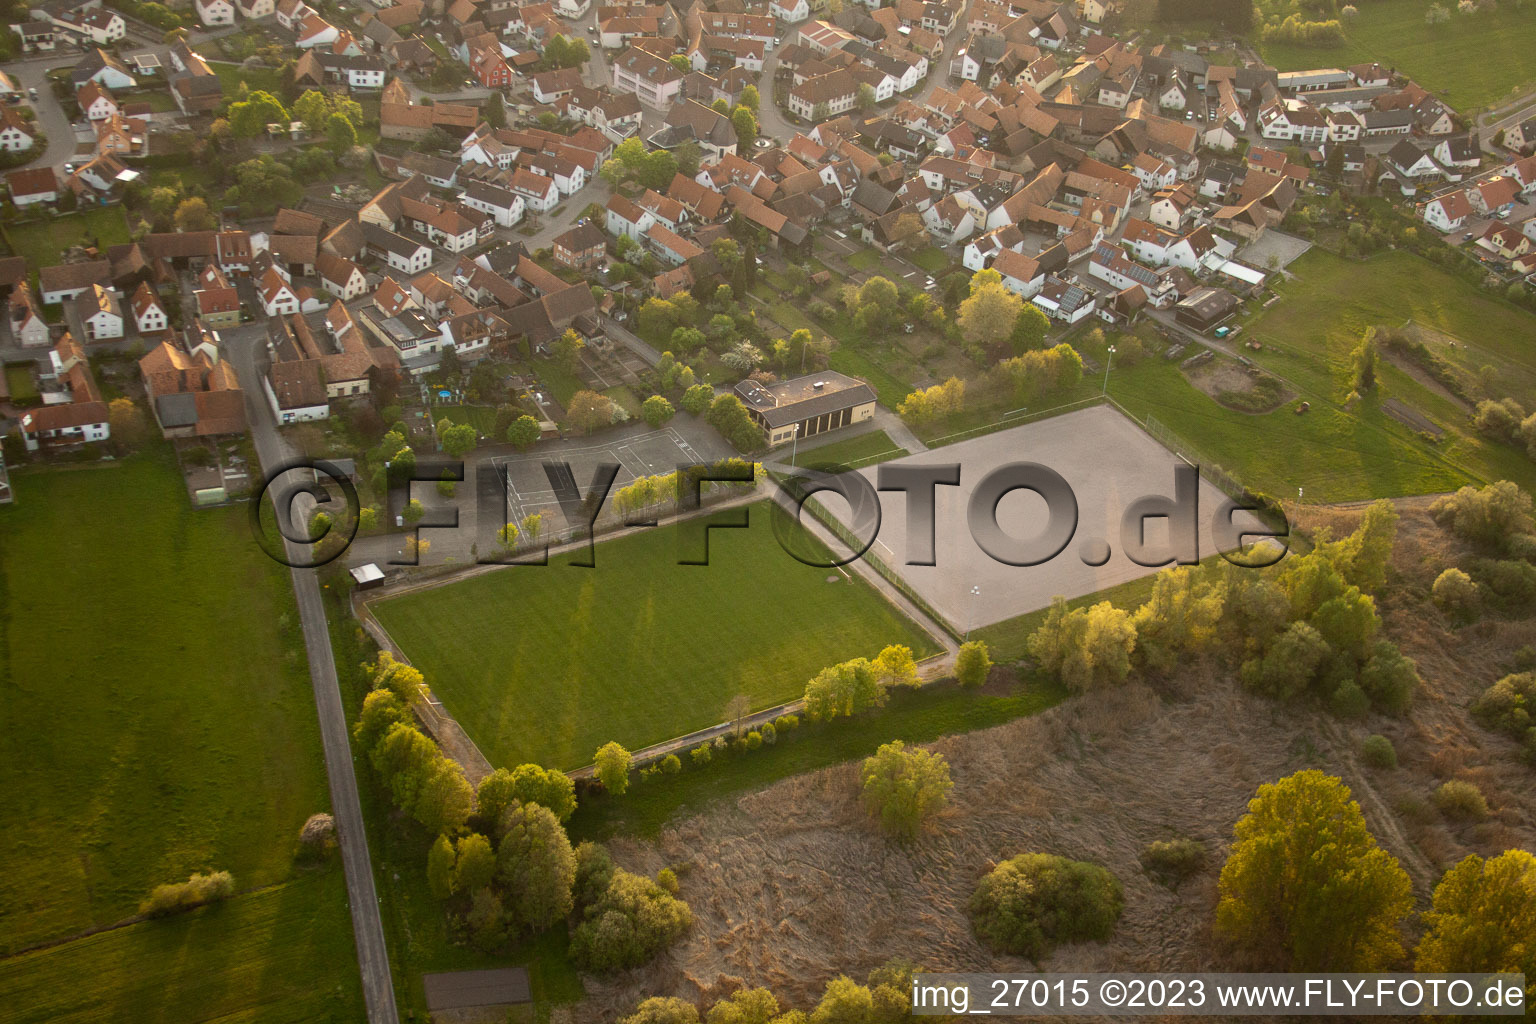 Aerial photograpy of Soccer fields in the district Büchelberg in Wörth am Rhein in the state Rhineland-Palatinate, Germany